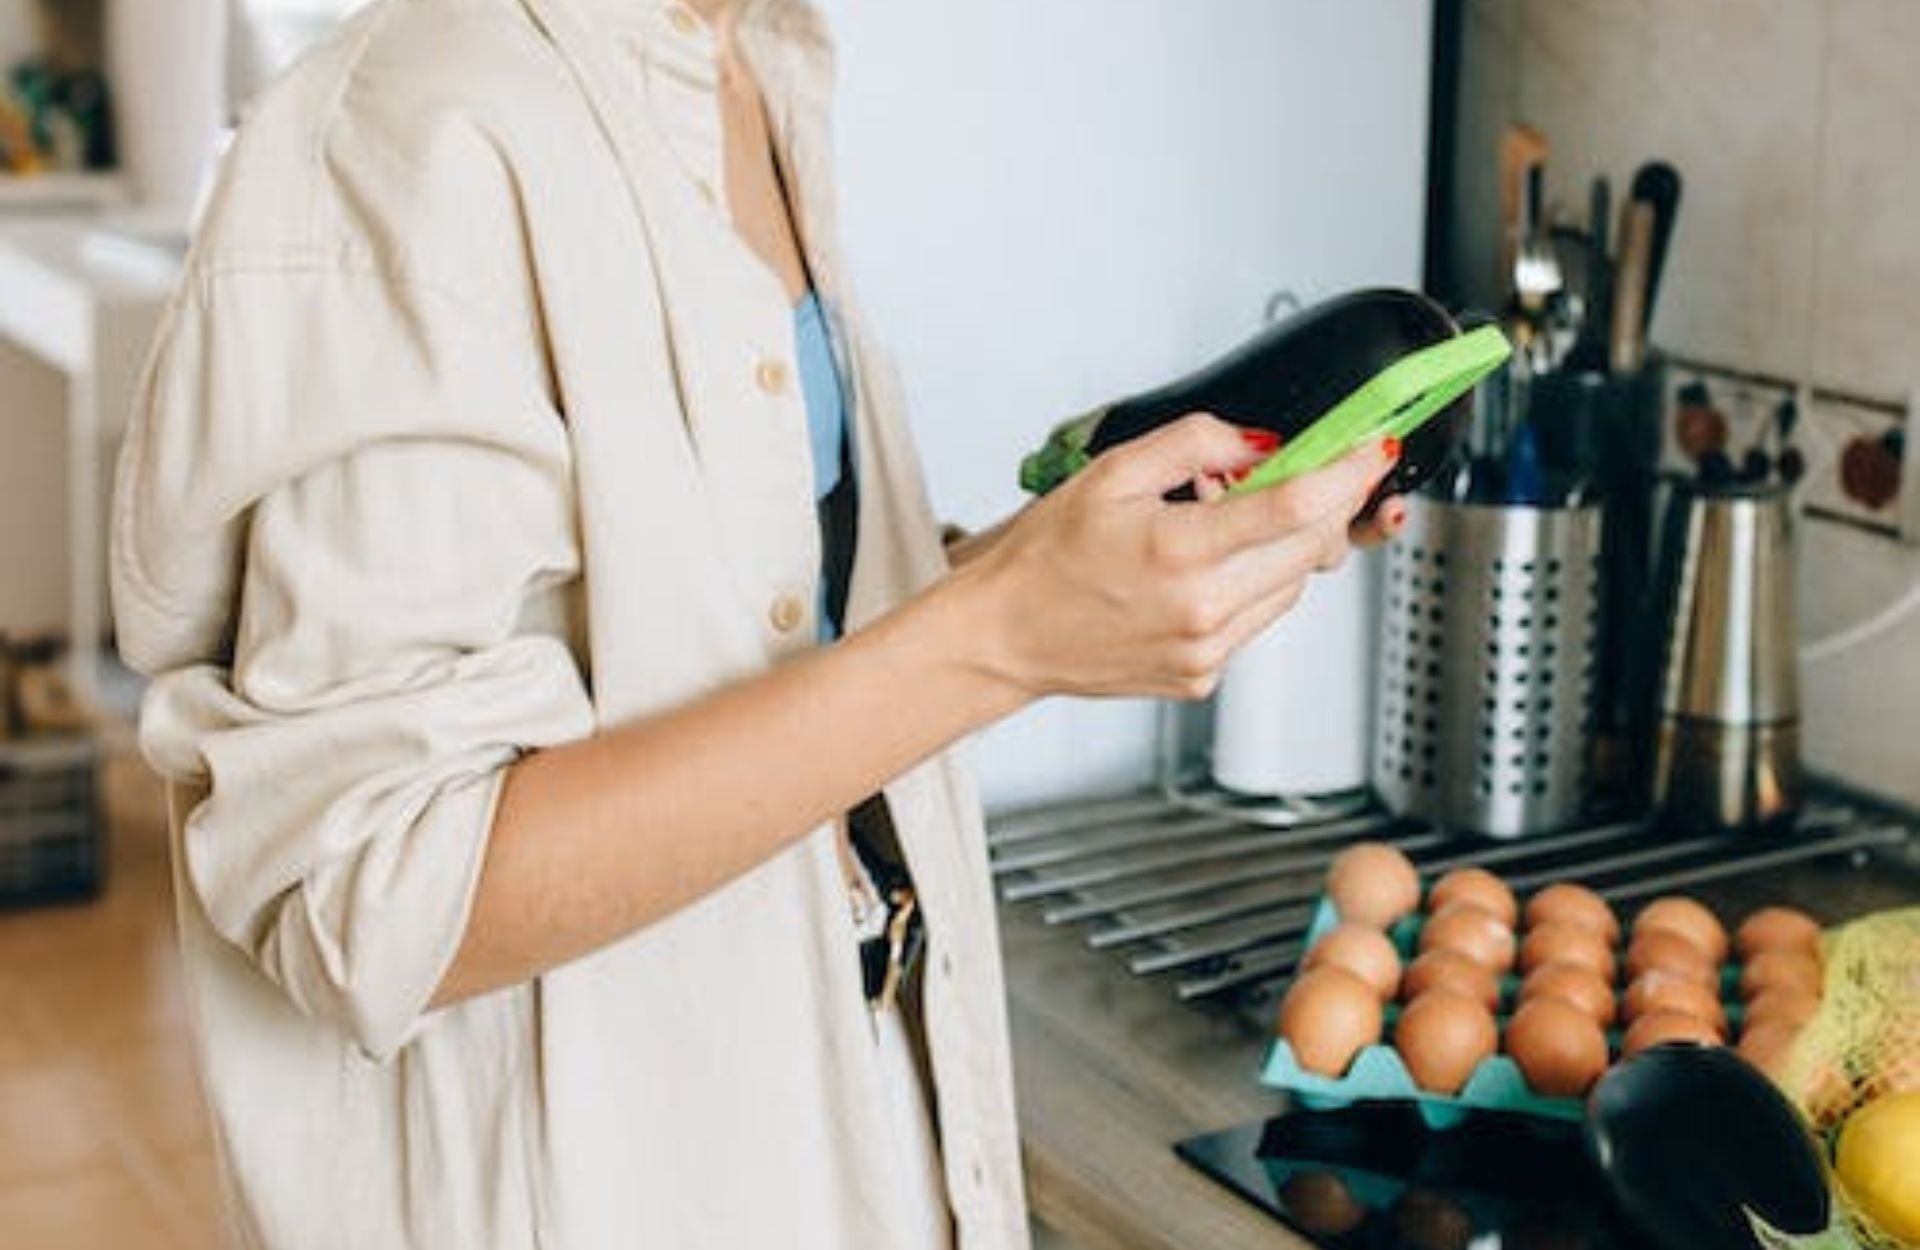 The Best Kitchen Gadgets for Your Home